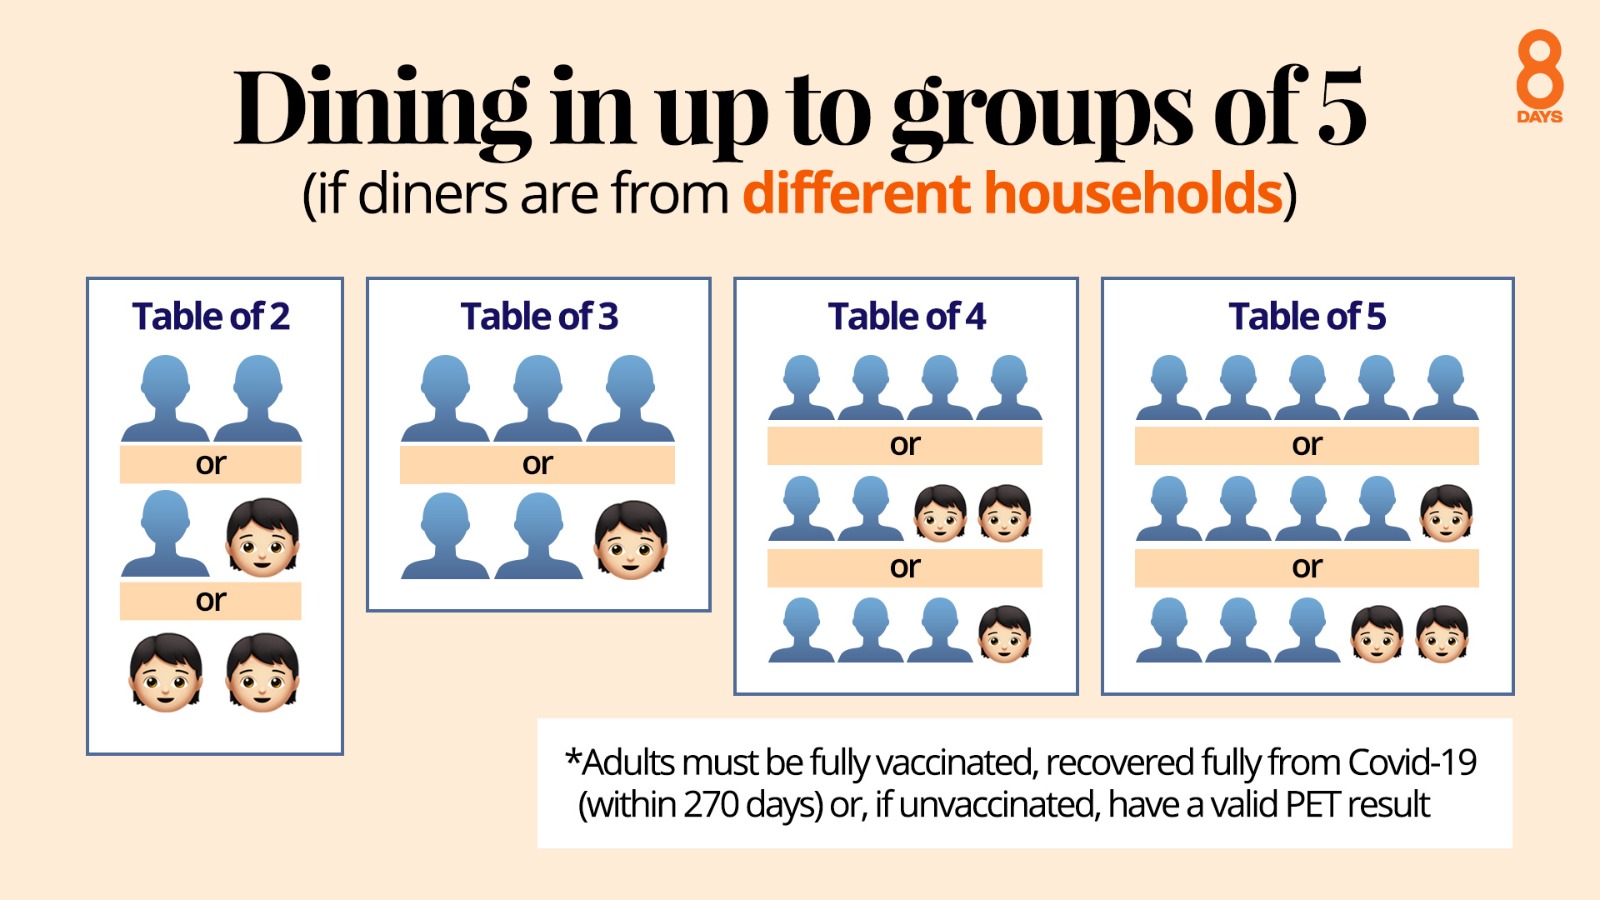 Dining in up to groups of five (different households)